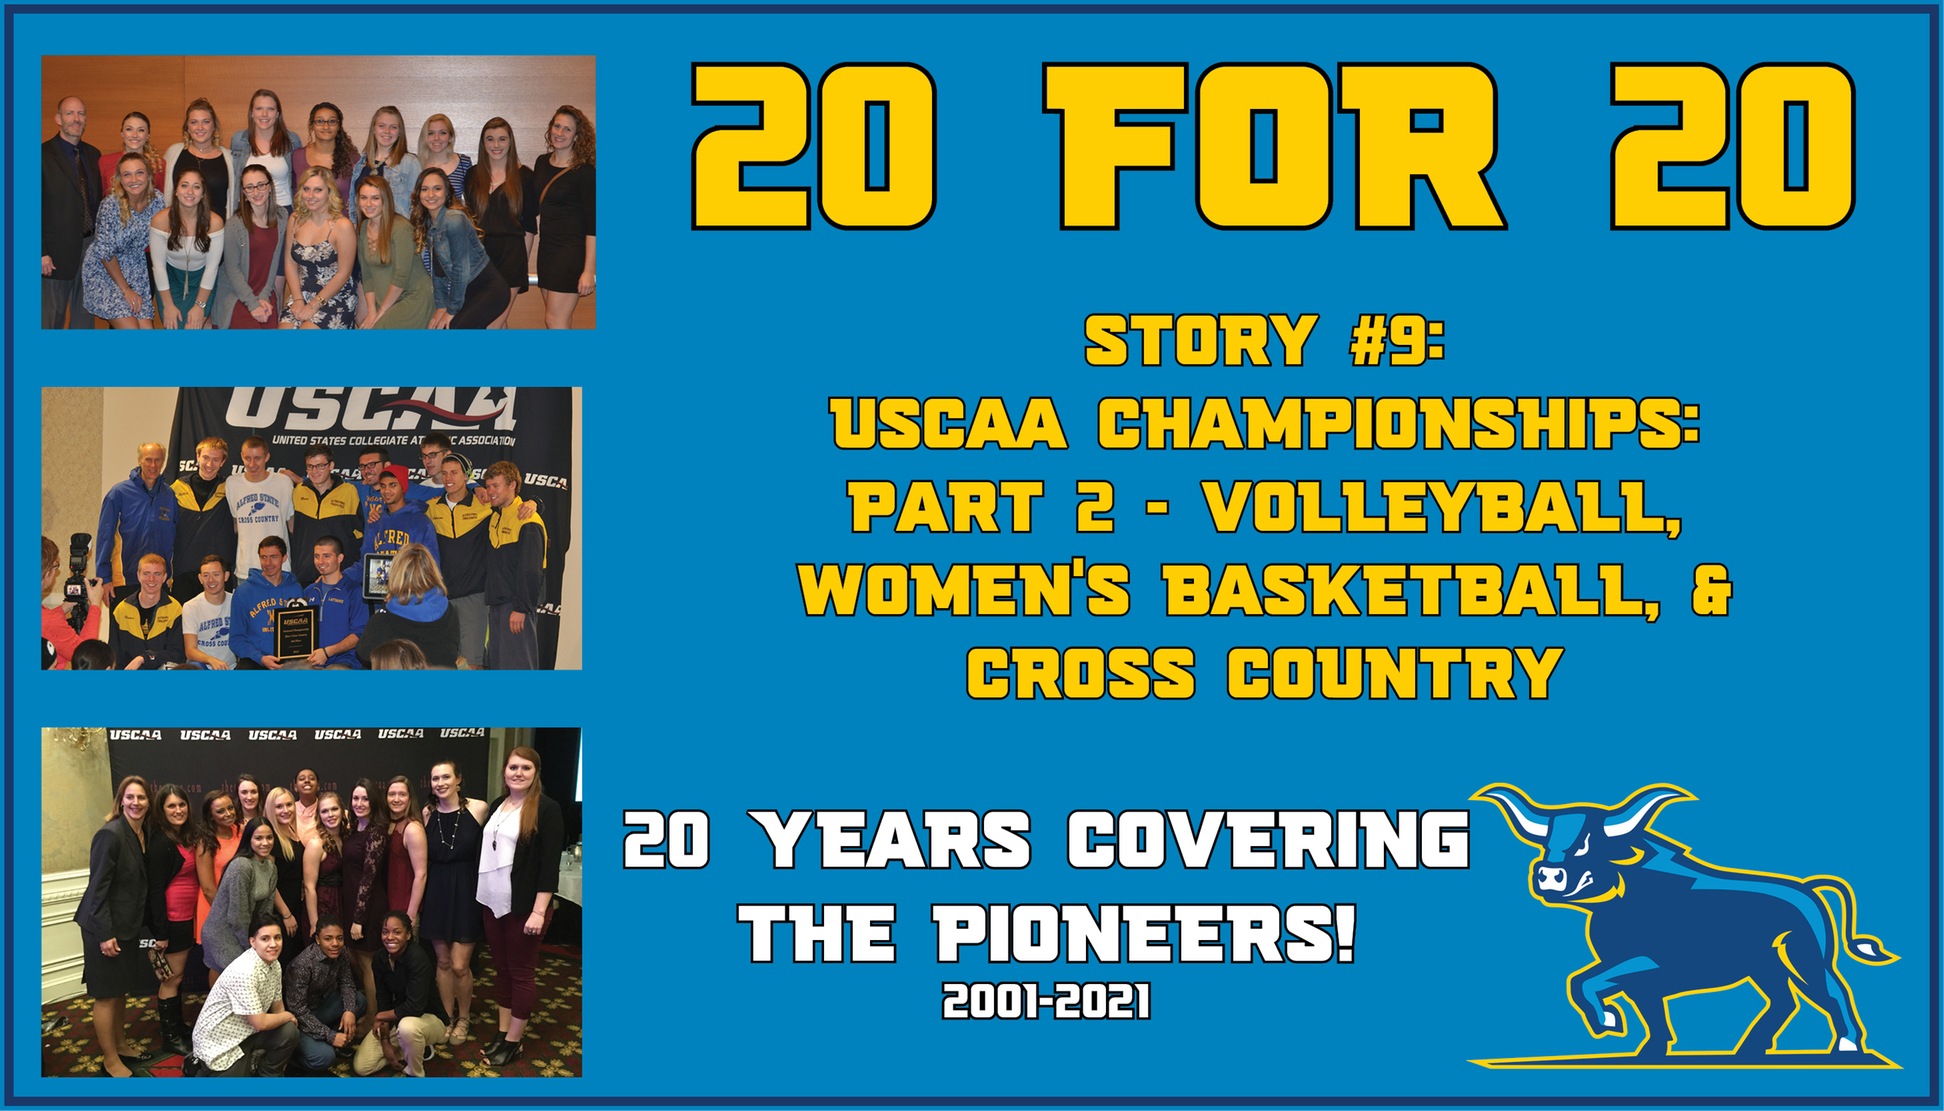 20 for 20 - Story 9 - USCAA Championships - Volleyball, Women's Basketball, and Cross Country

Featured are pictures of the volleyball team at a USCA Championship banquet, the men's cross country team with their 3rd place trophy, and women's basketball team at the USCAA banquet